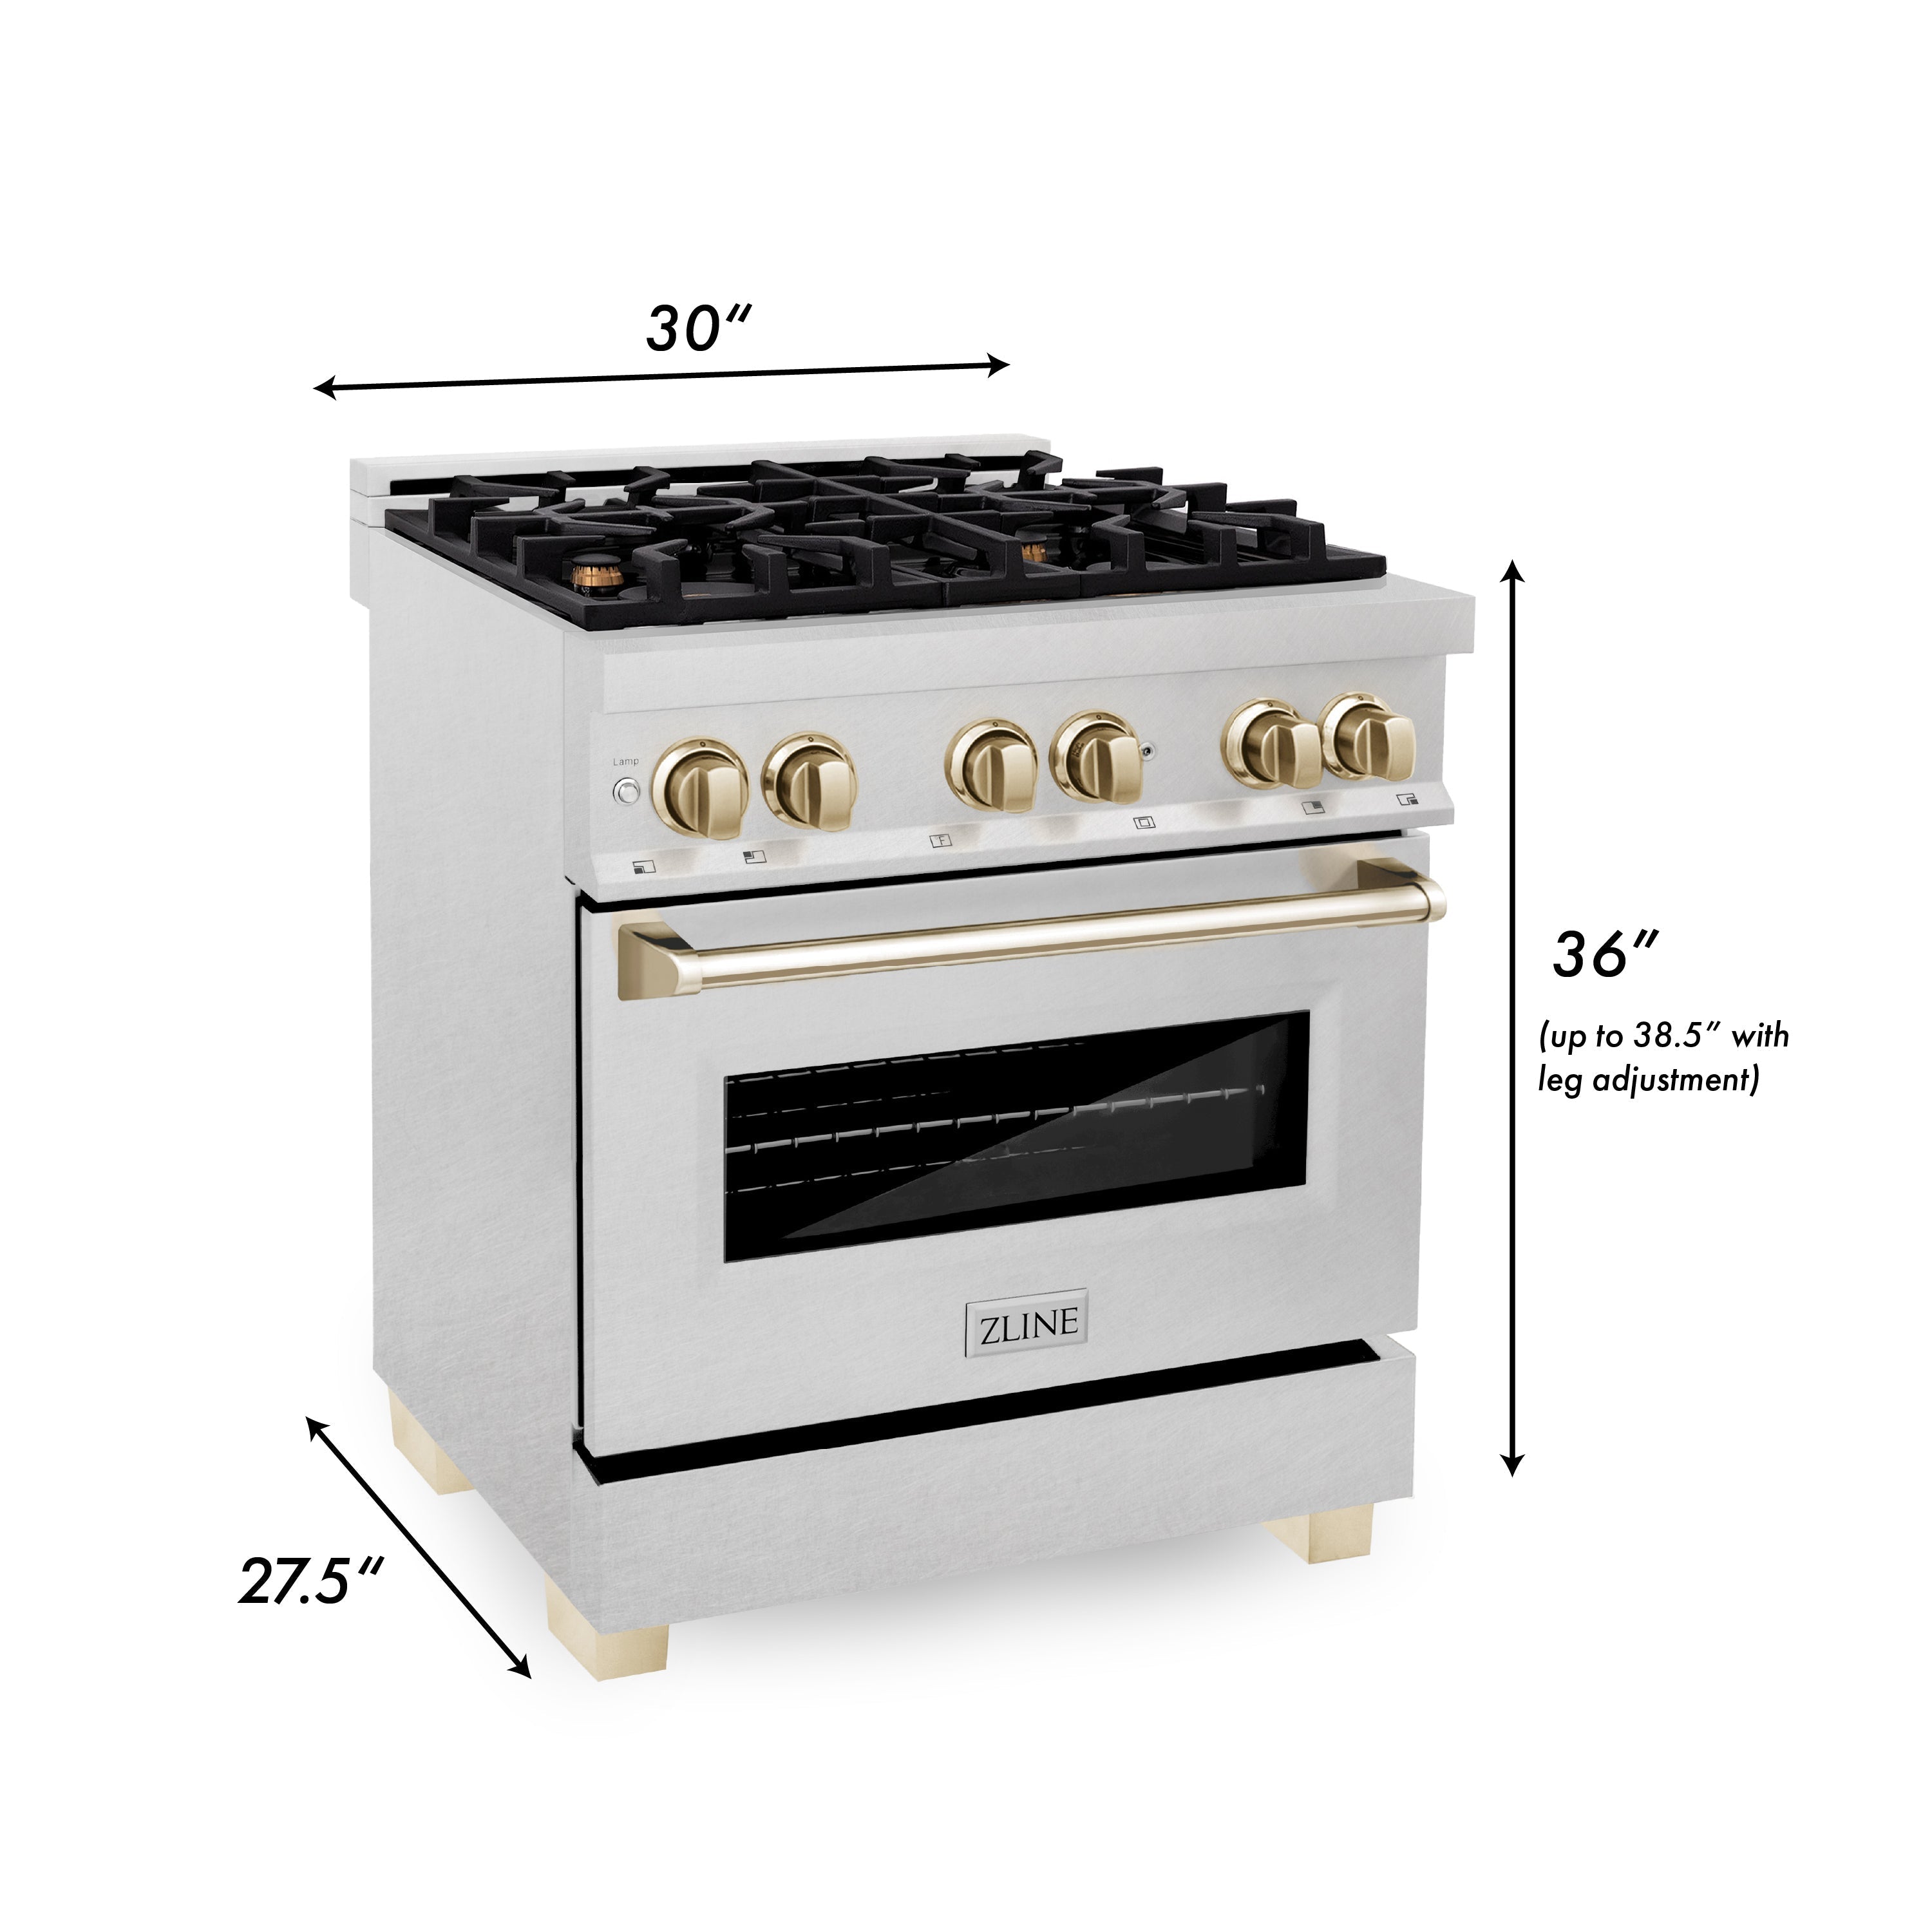 ZLINE Autograph Edition 30" 4.0 cu. ft. Dual Fuel Range with Gas Stove and Electric Oven in DuraSnow Stainless Steel with Accents (RASZ-SN-30) - New Star Living